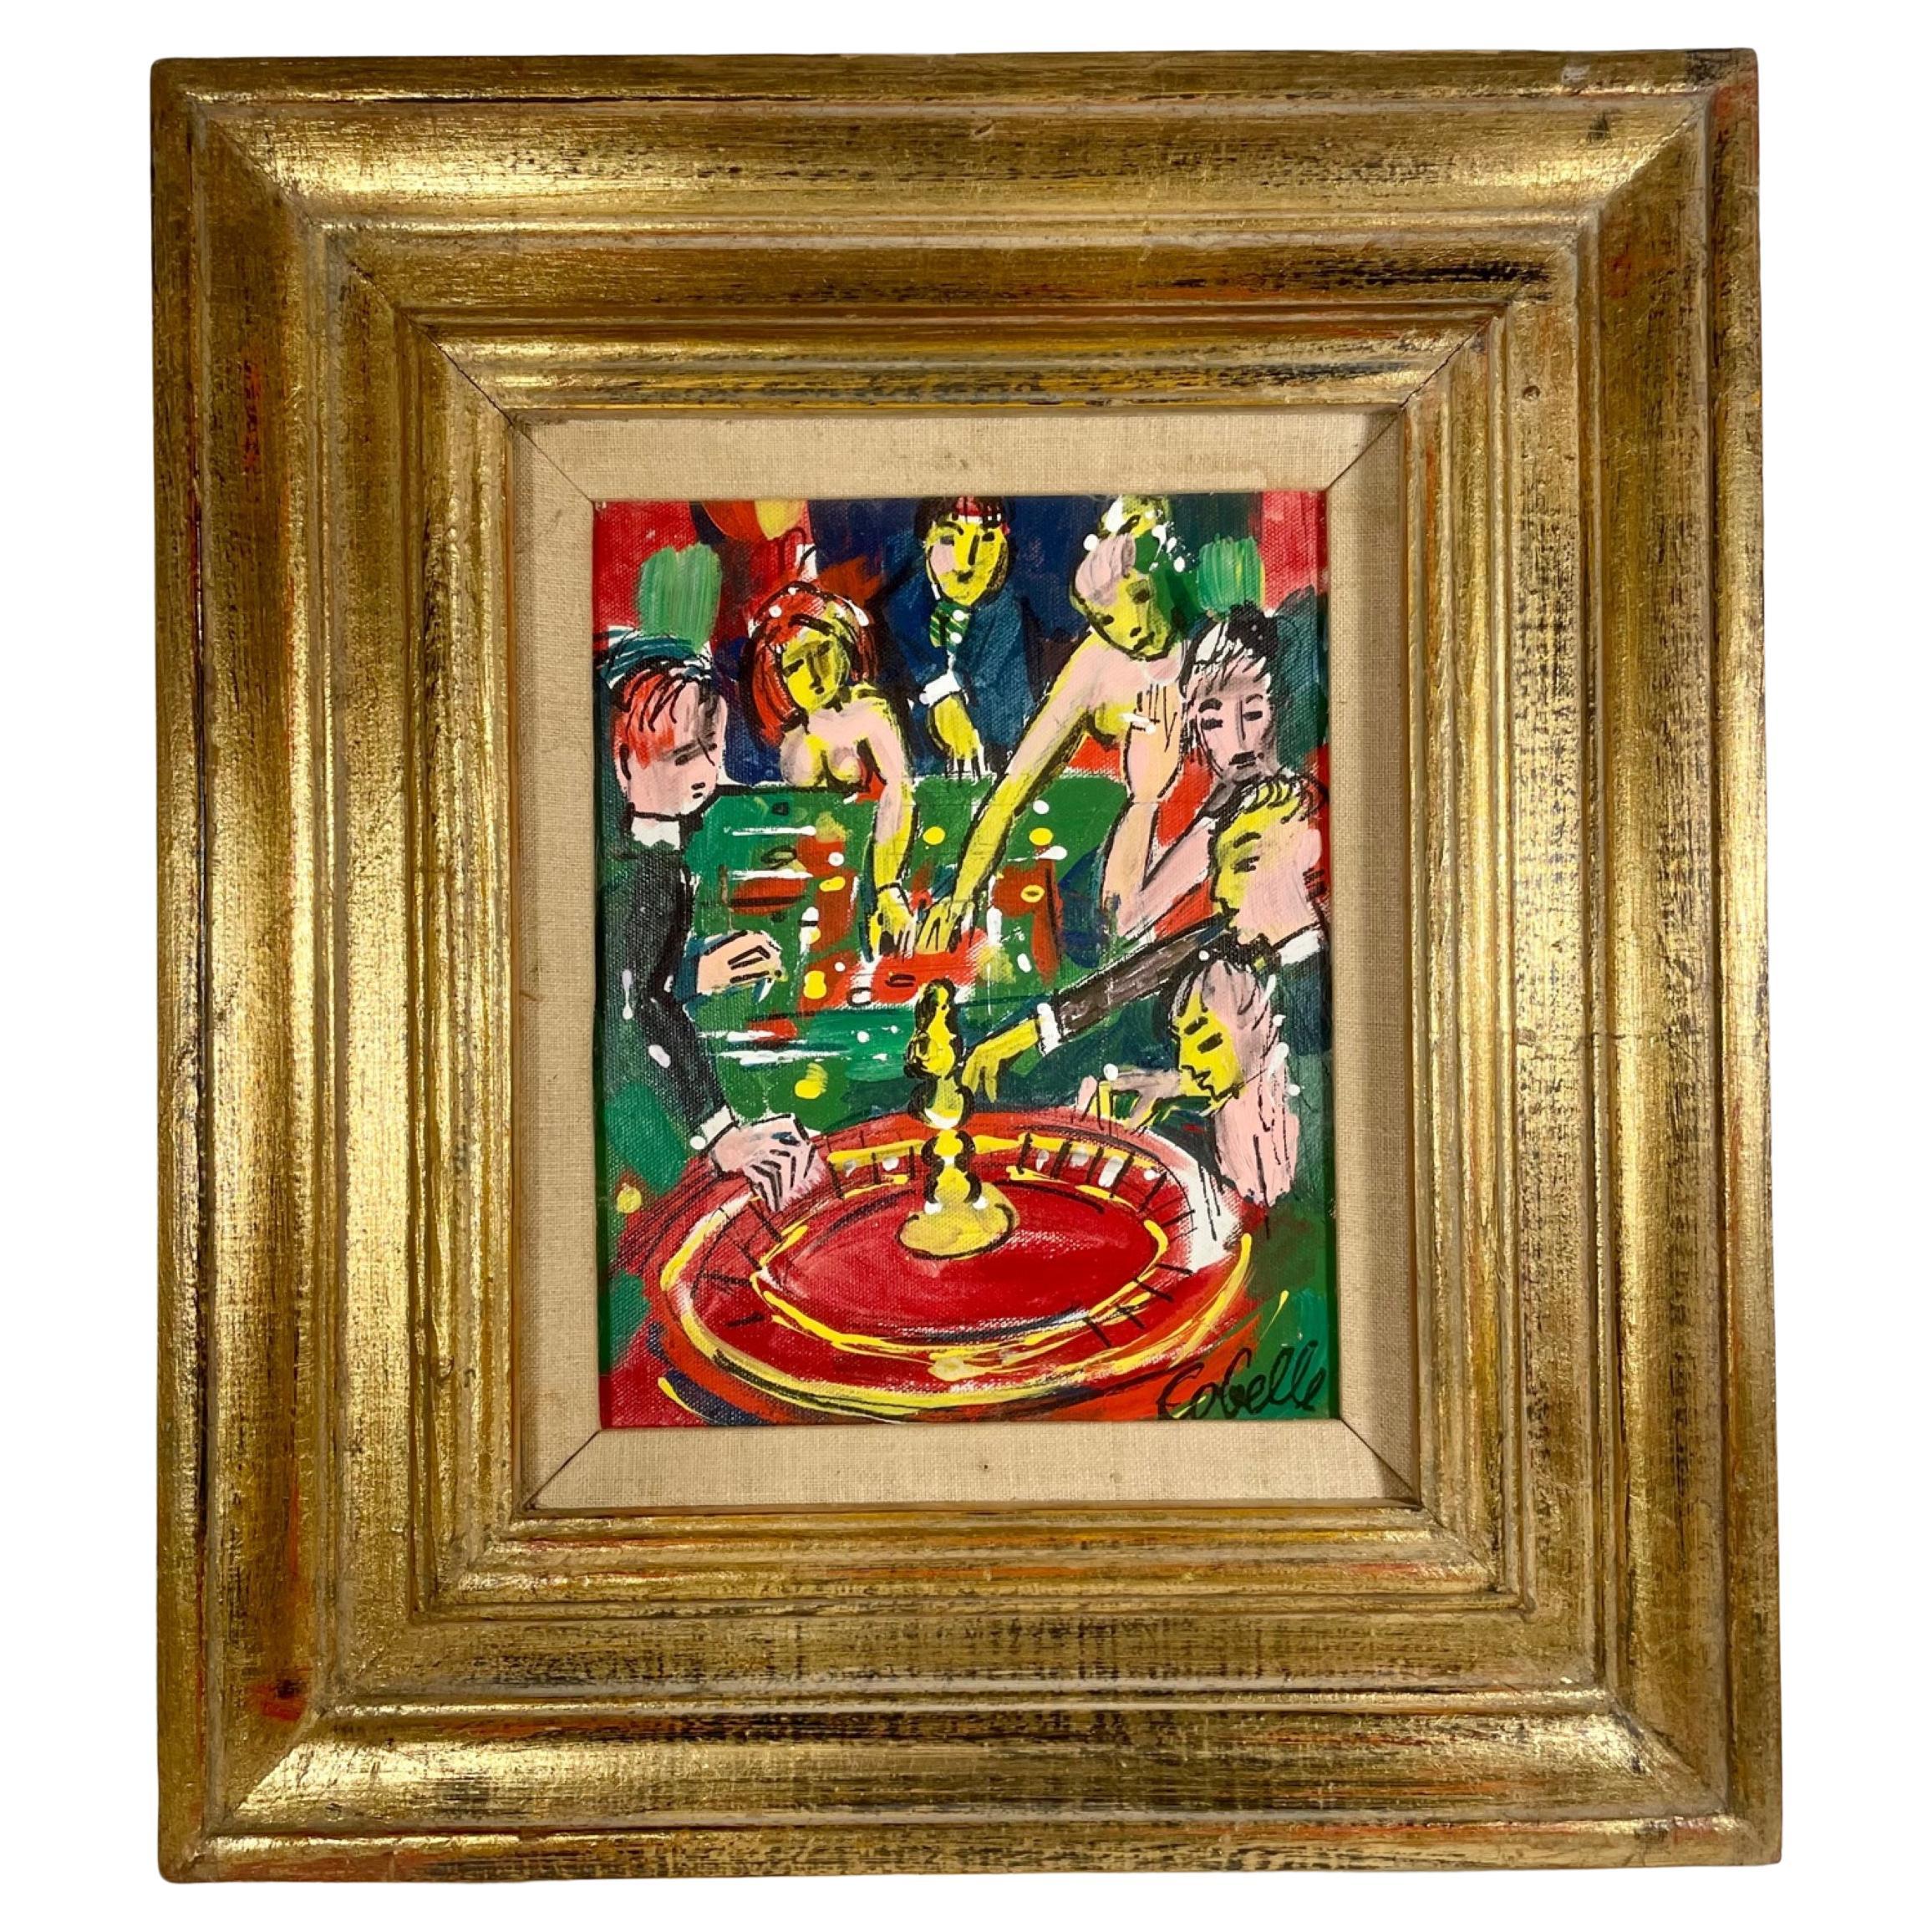 Modern French Master Painting “Casino” Signed Cobelle